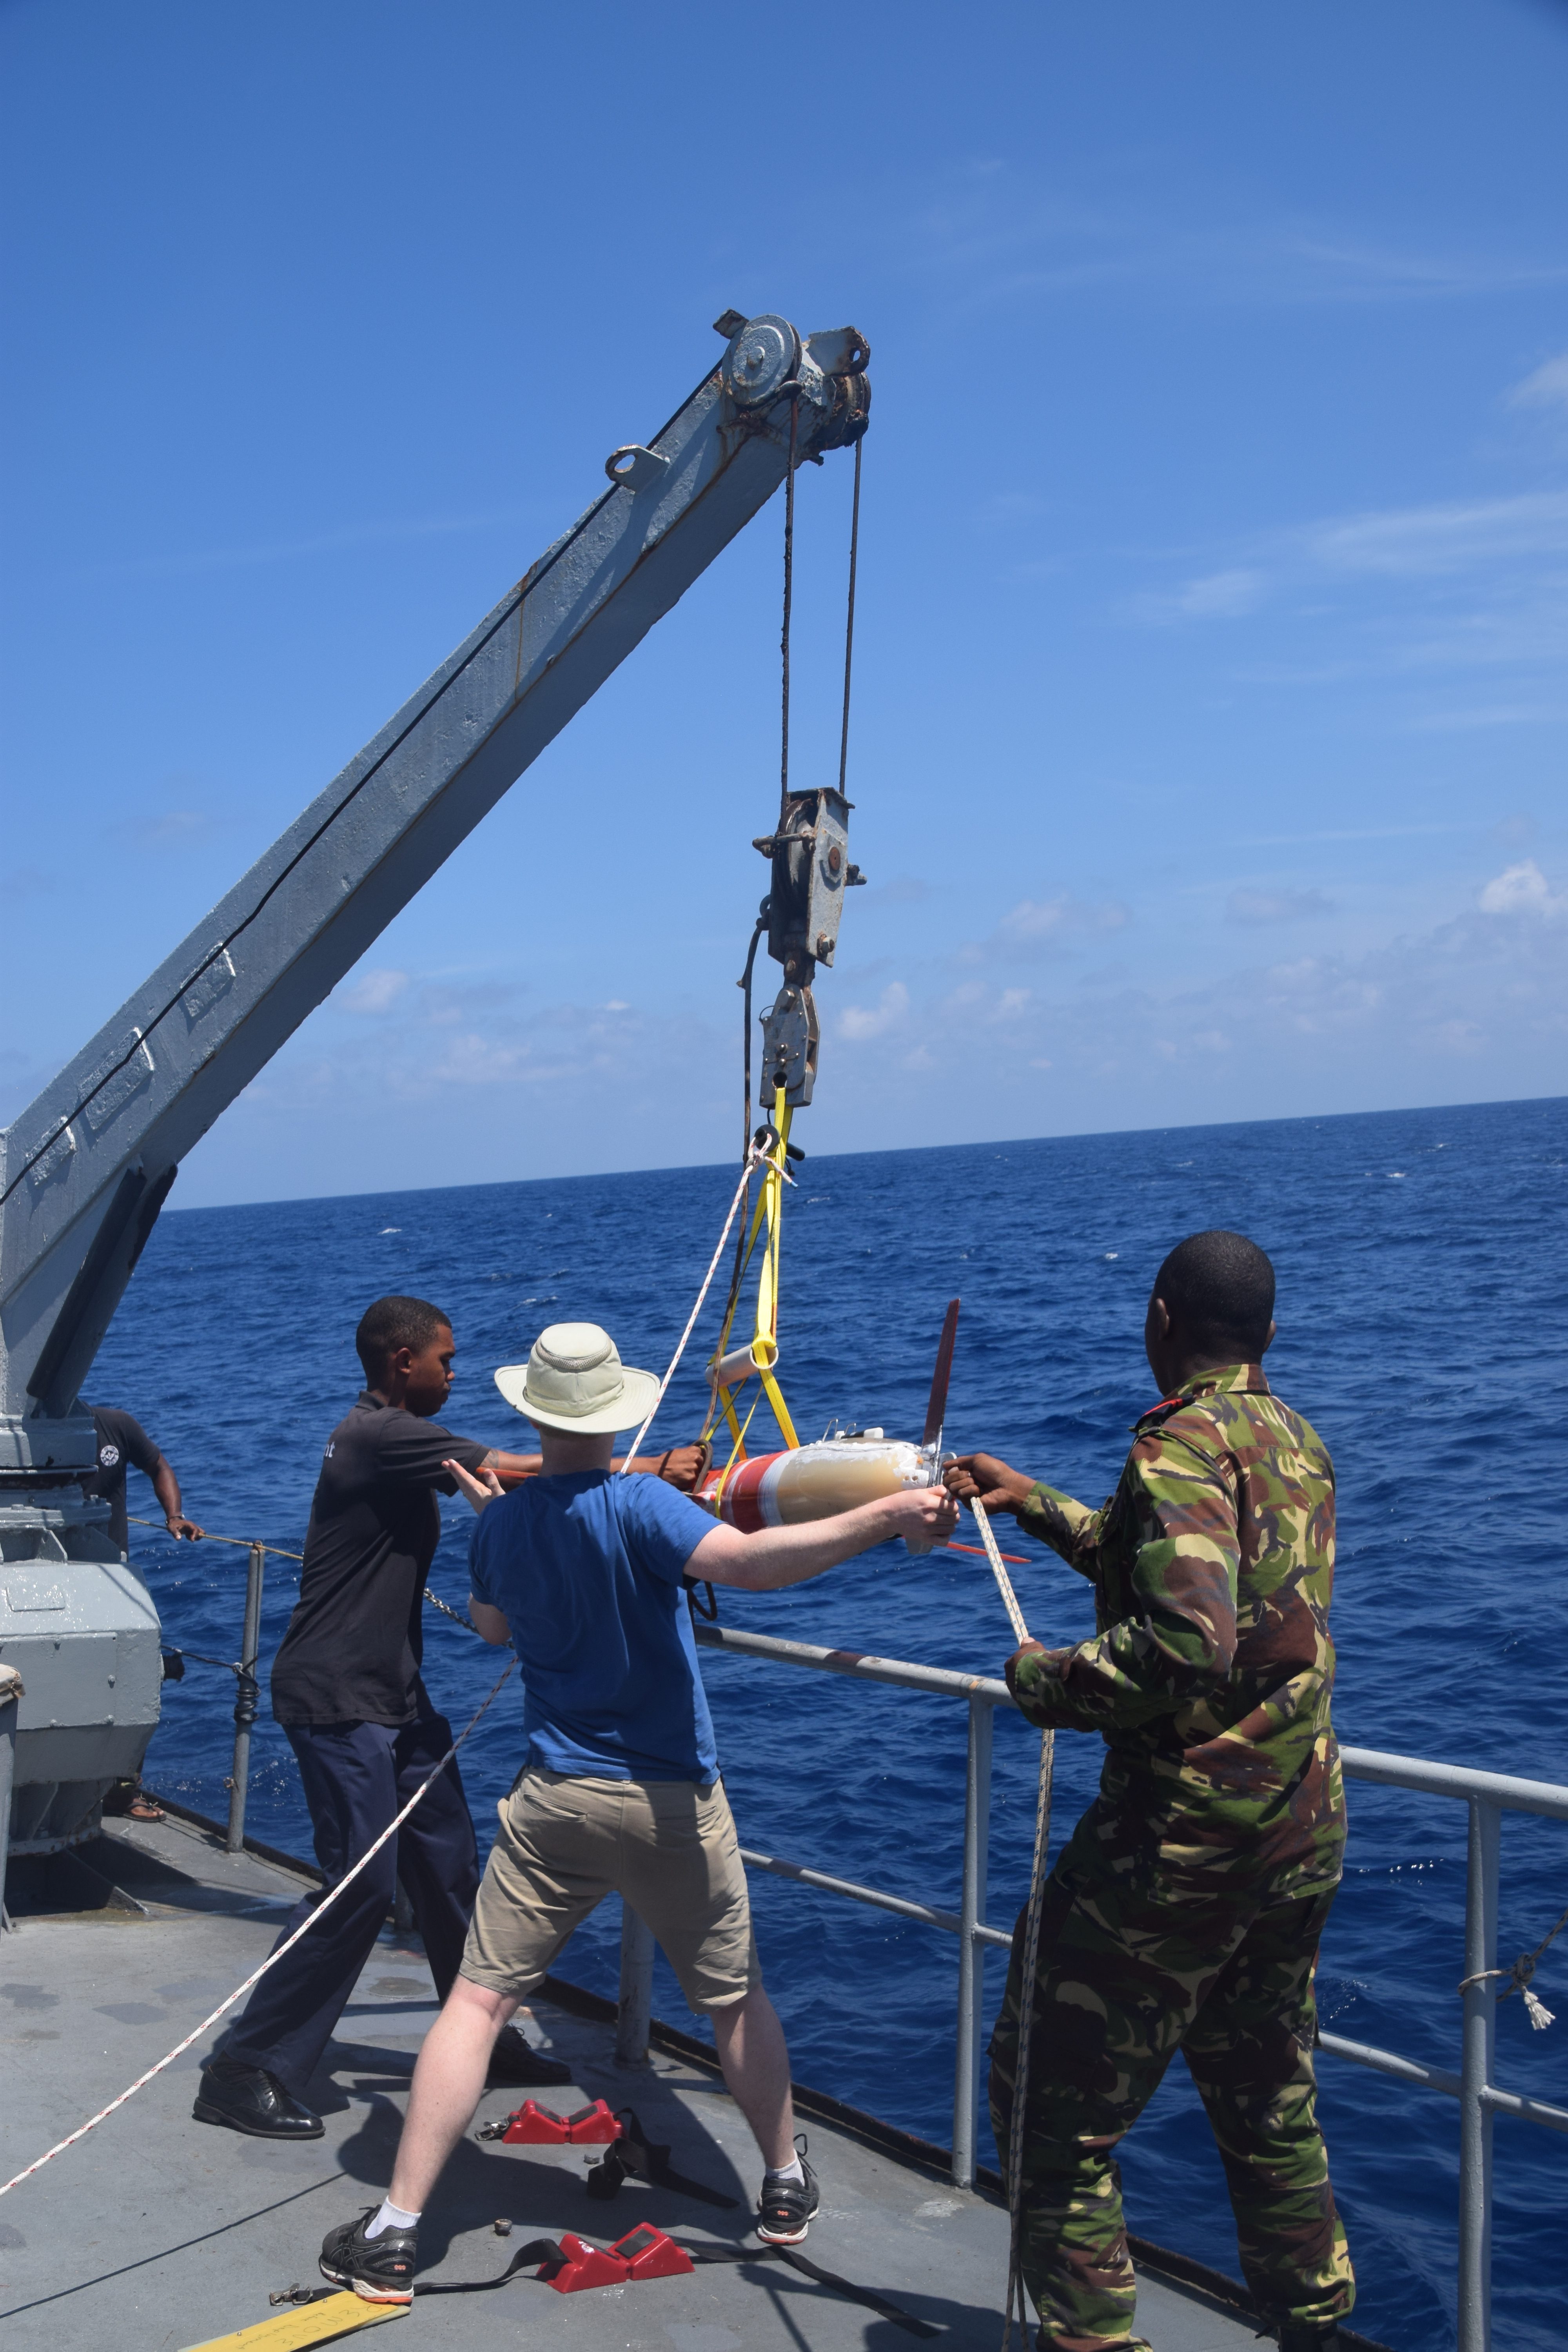 Robert and two crew members using the crane on the Étoile to lift the glider into the water. (Photo: Joleen Heiderich, MIT/WHOI Joint Program)